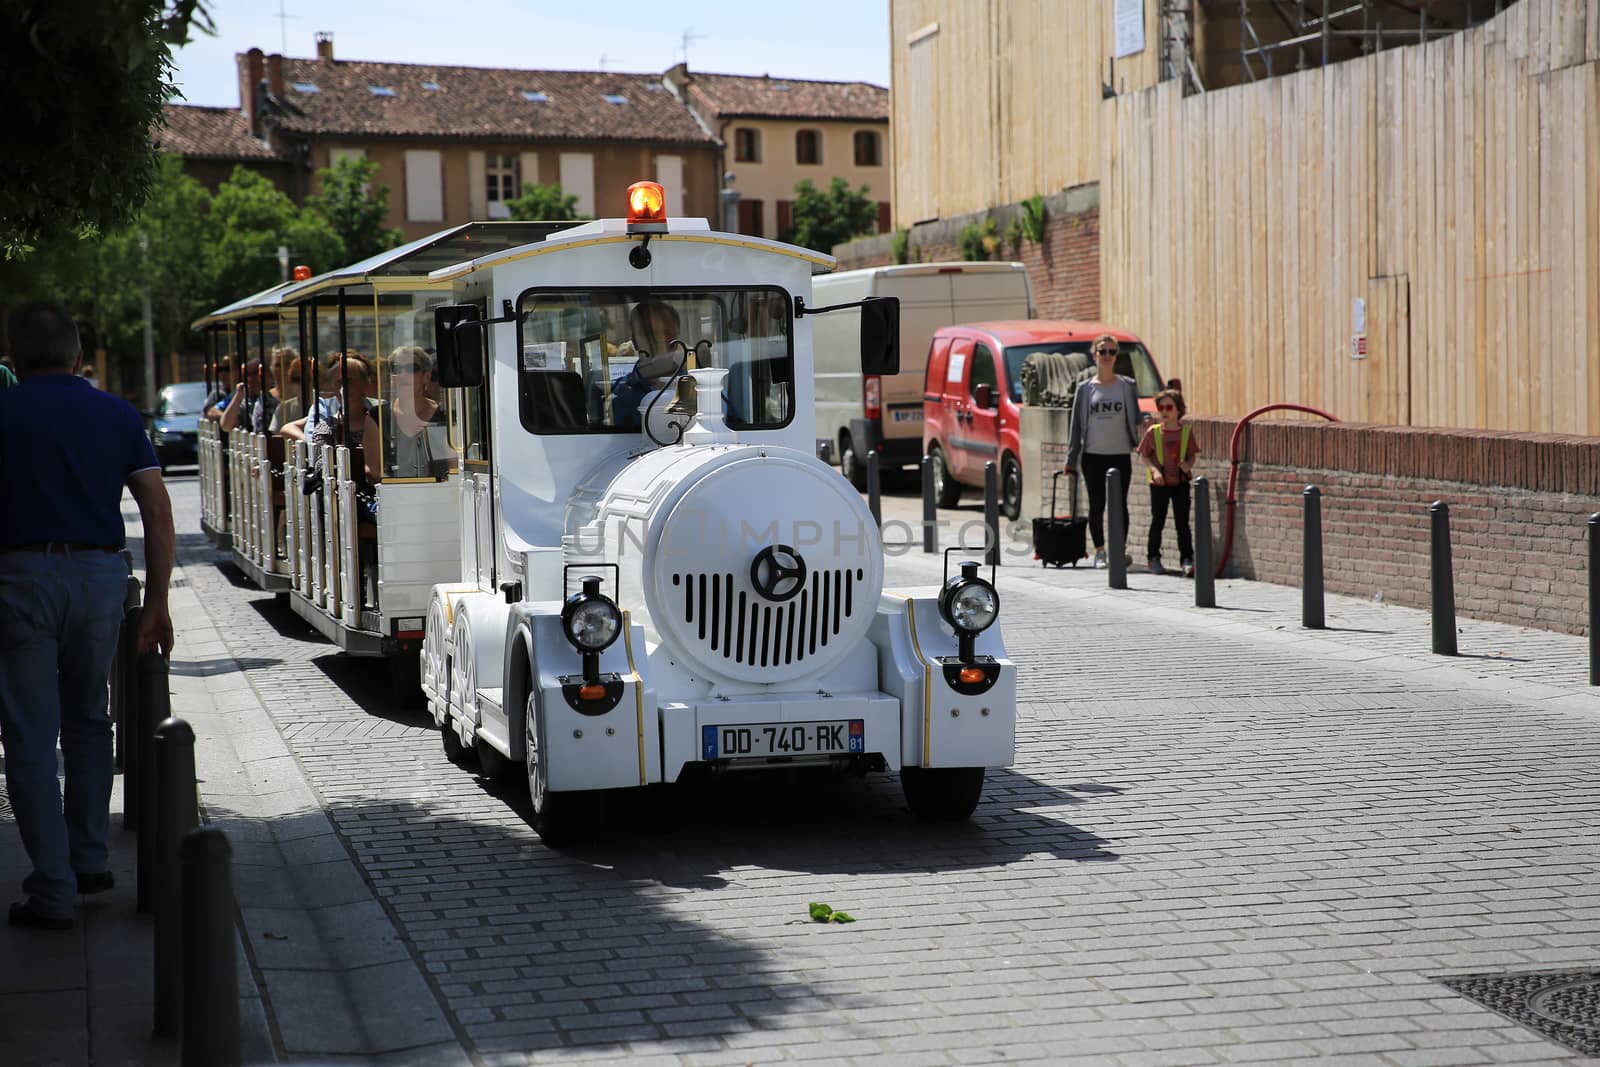 White Trackless Train in The Streets of Albi by bensib